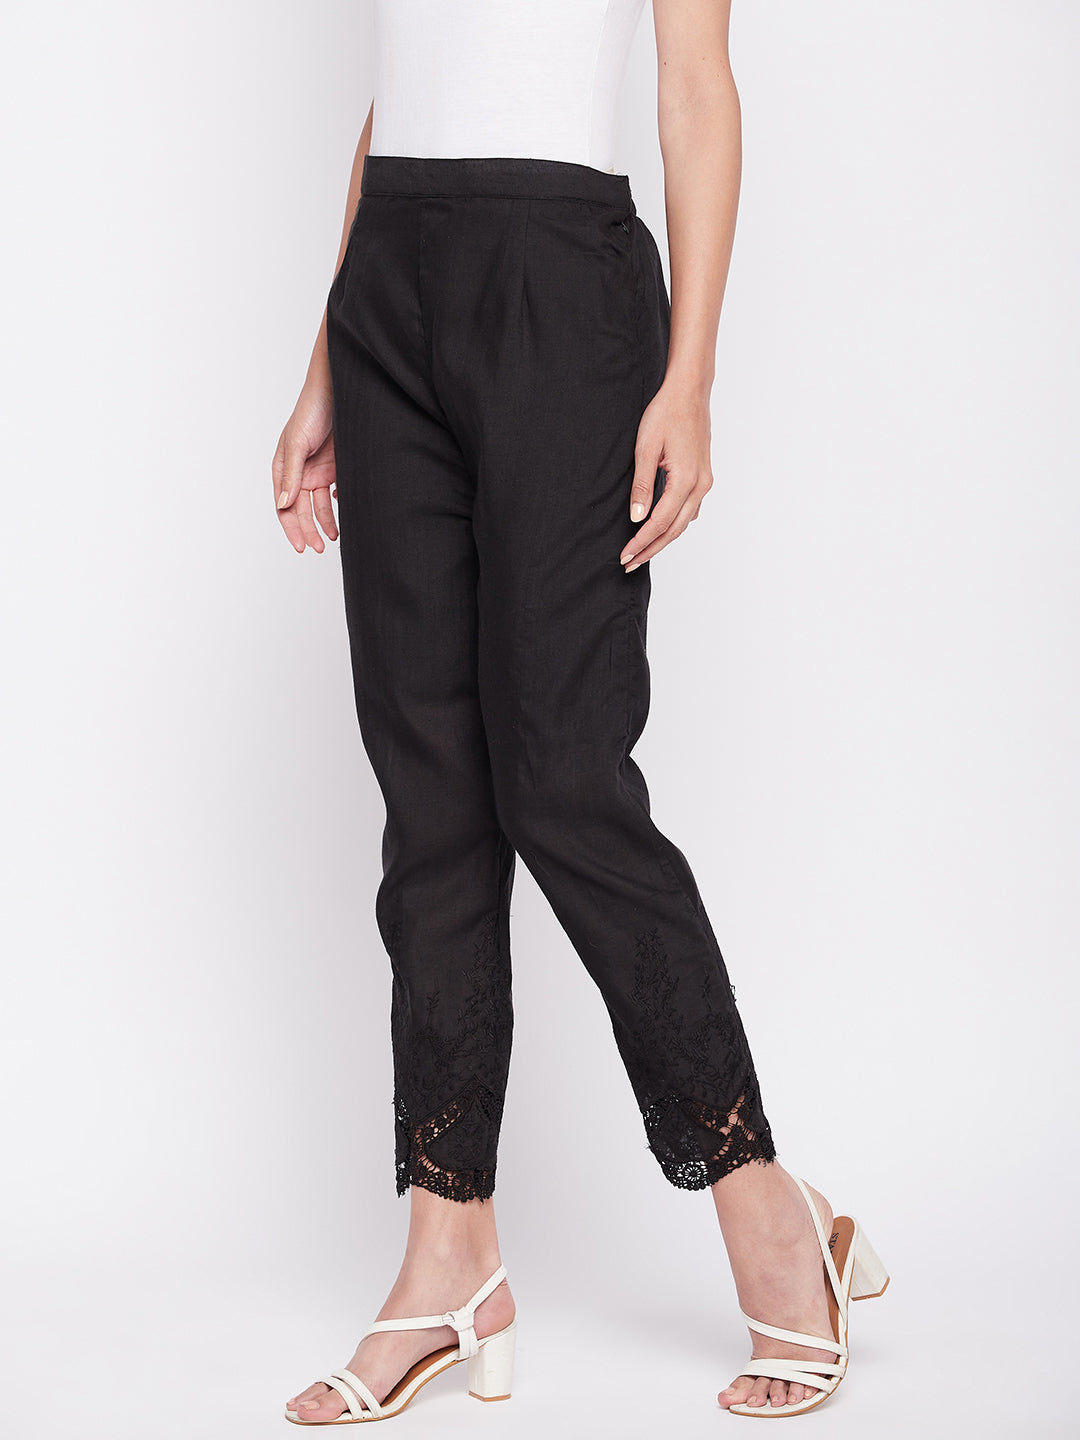 Clora Black Solid Cotton Embroidered Pant